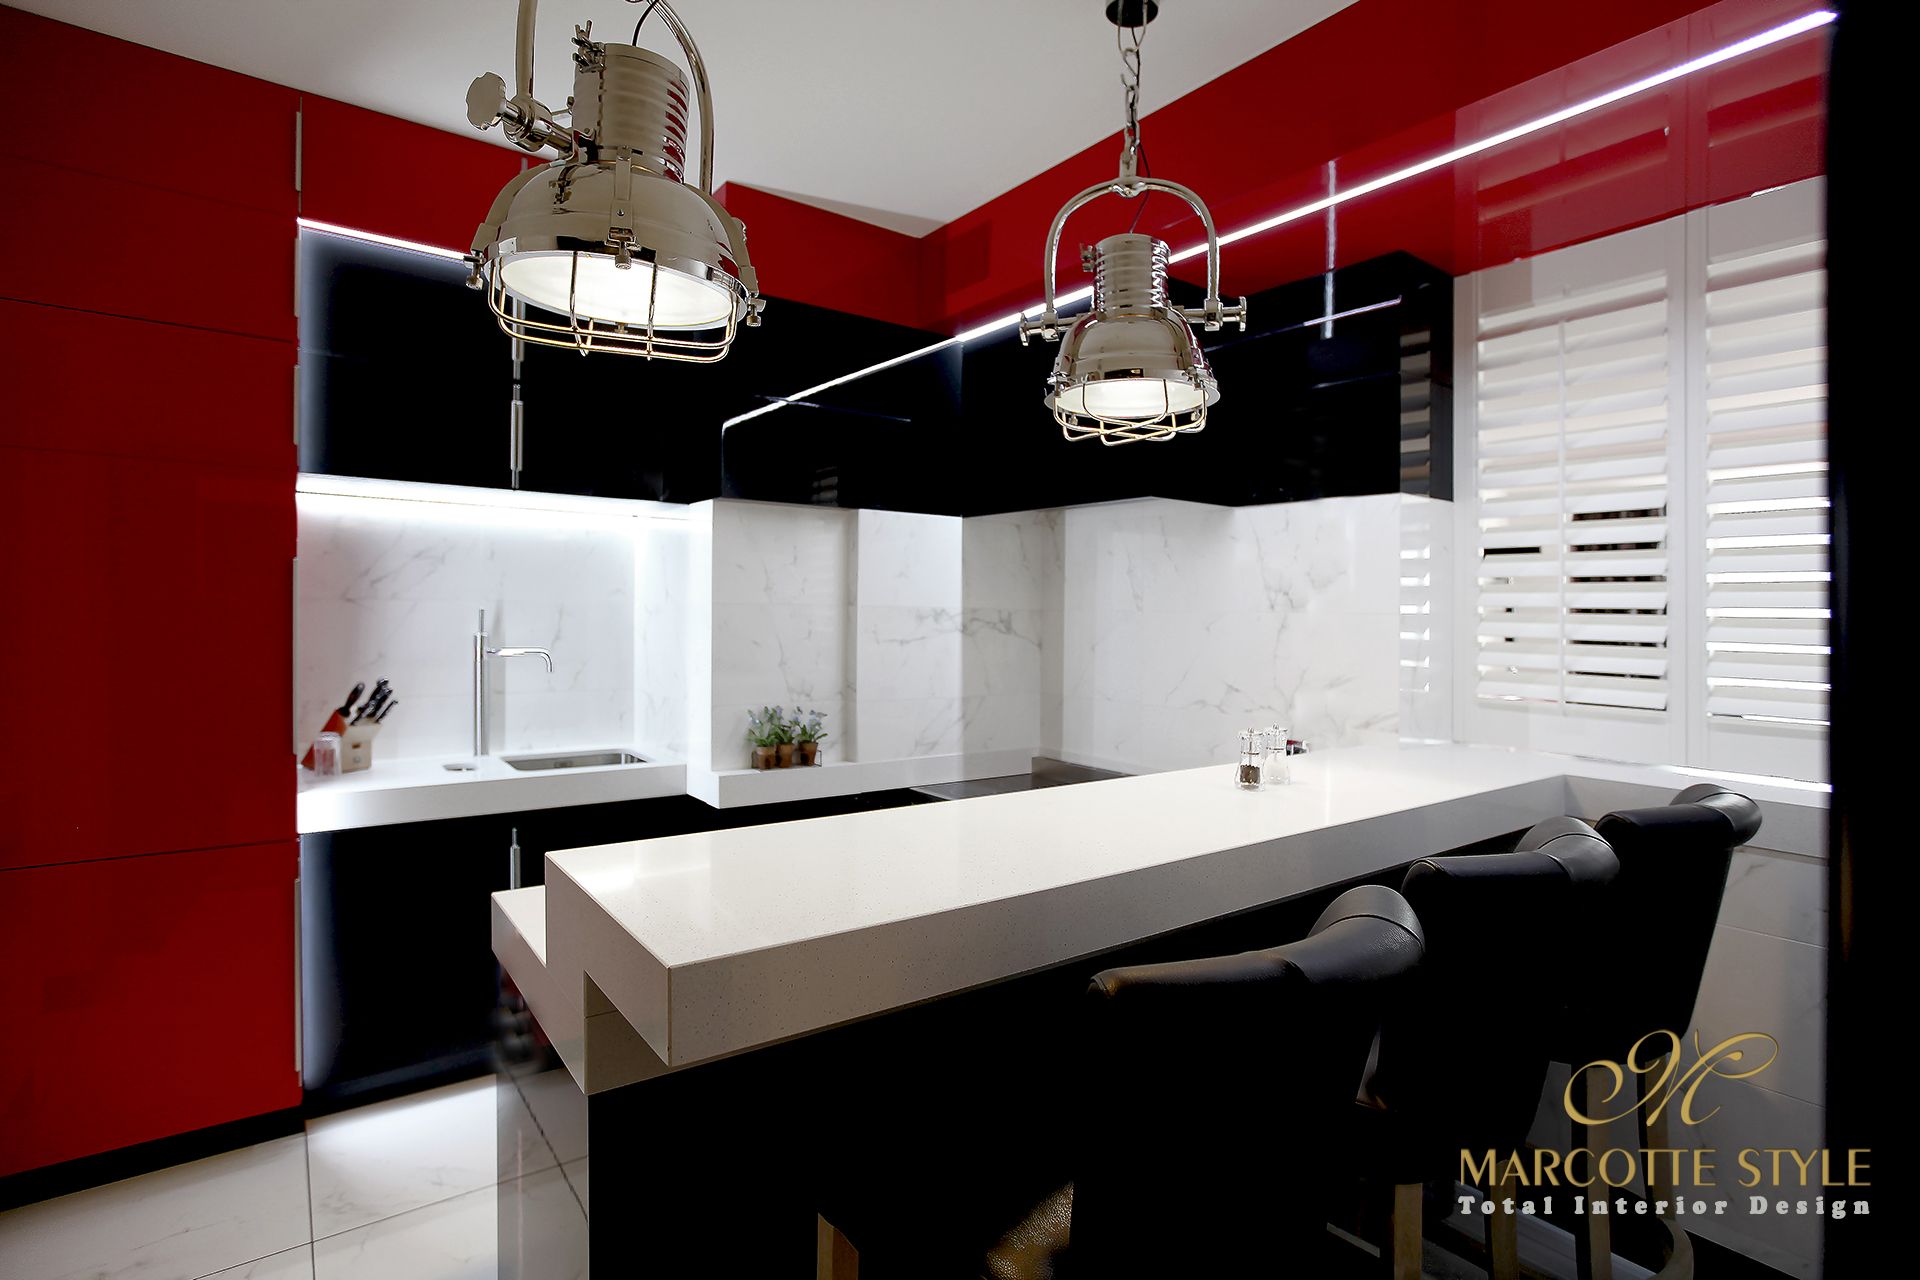 Modern kitchens, bedrooms, dining rooms and bathrooms - Marcotte Style